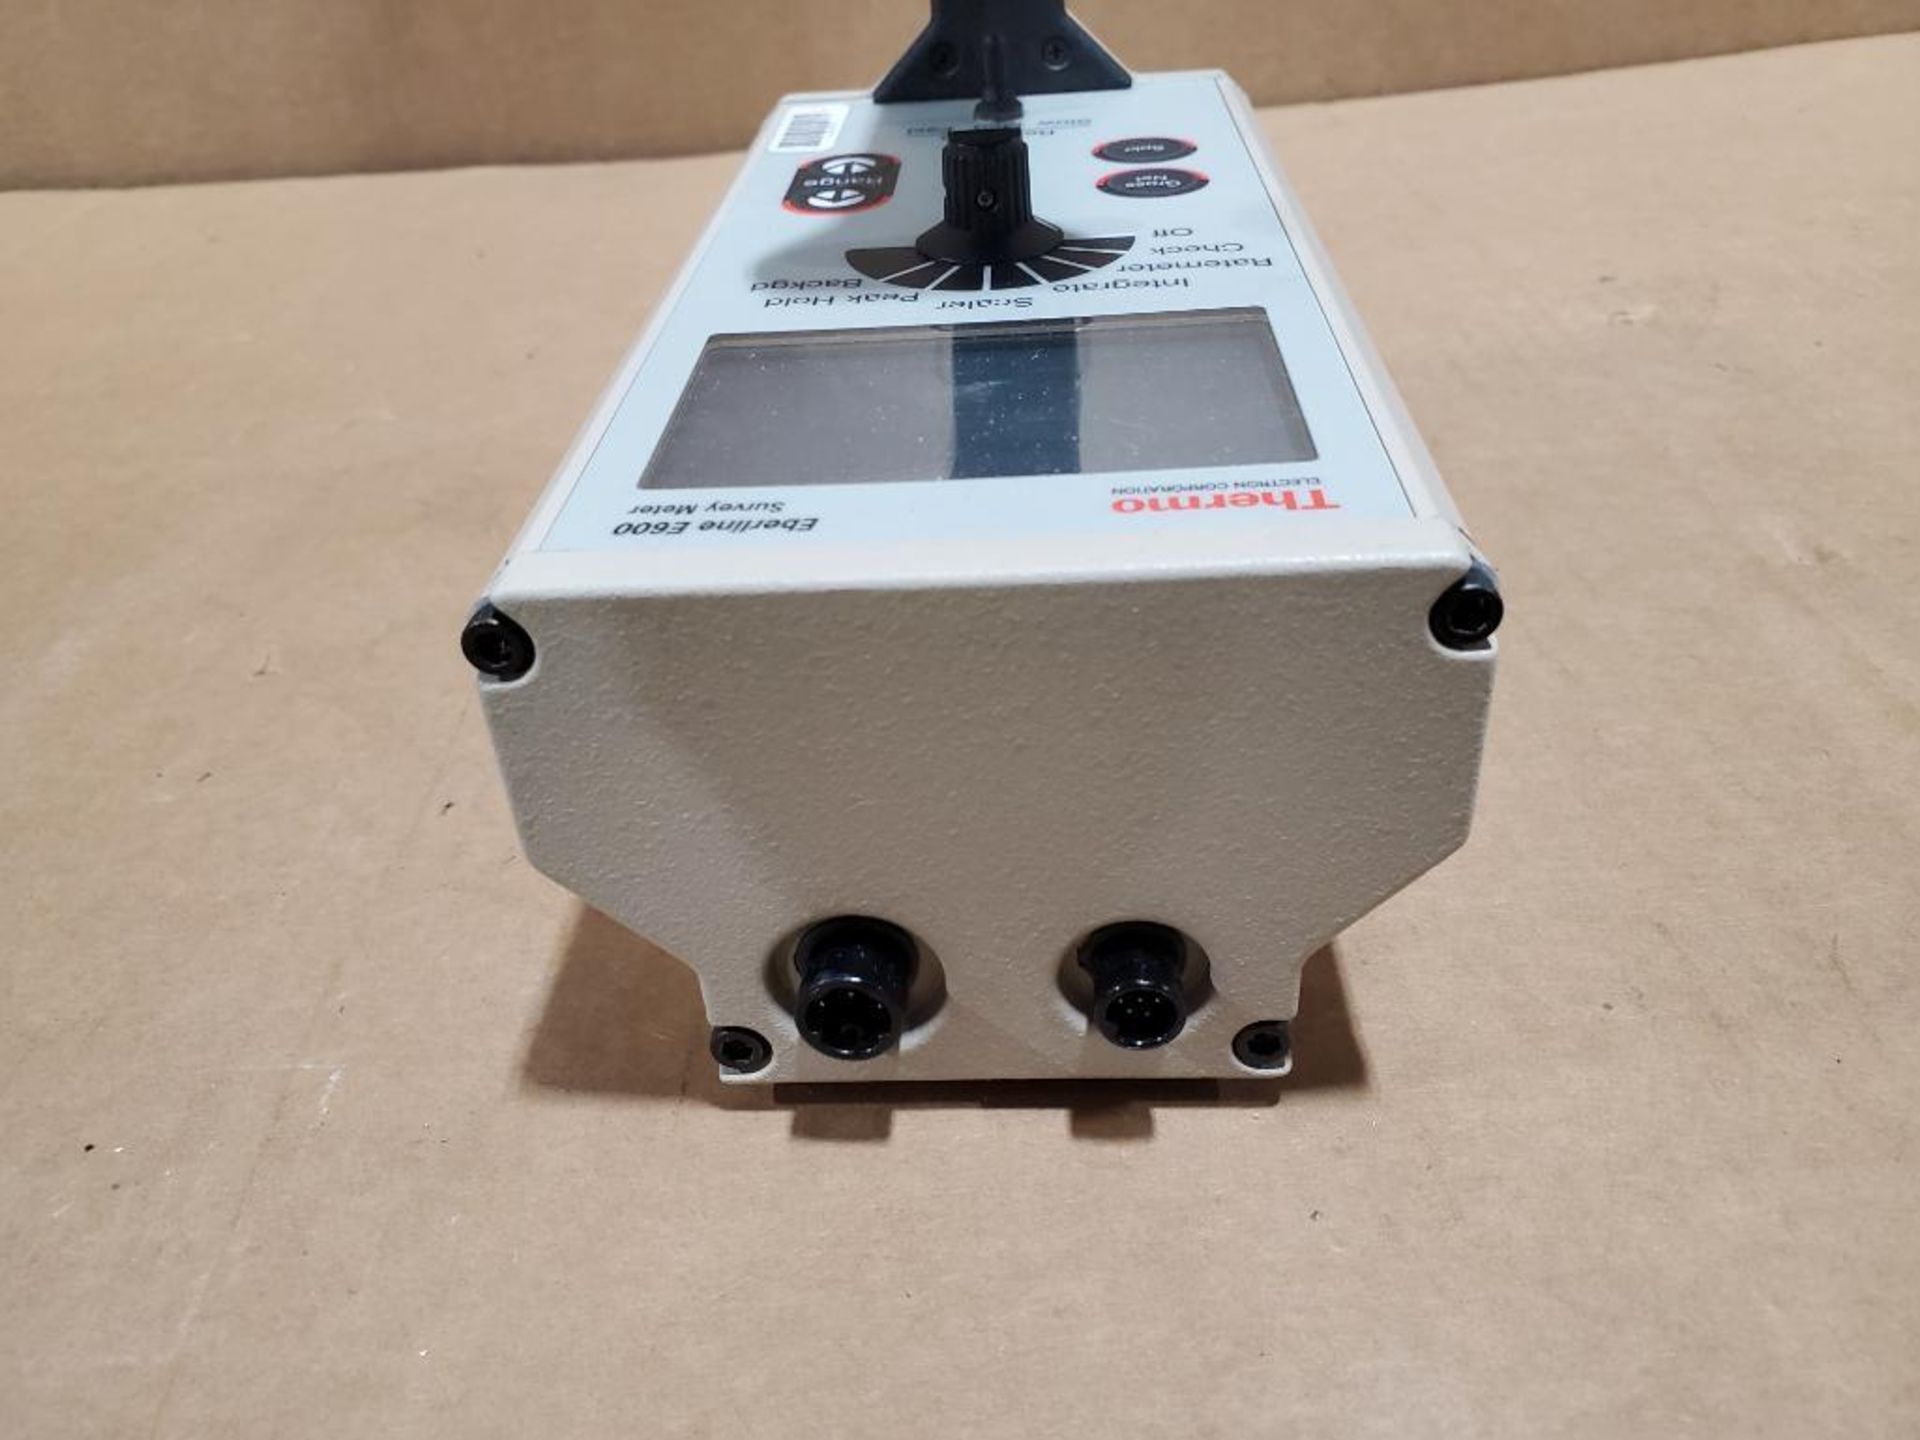 Thermo Electron Corporation geiger counter survey meter. Model Eberline E600. - Image 6 of 7